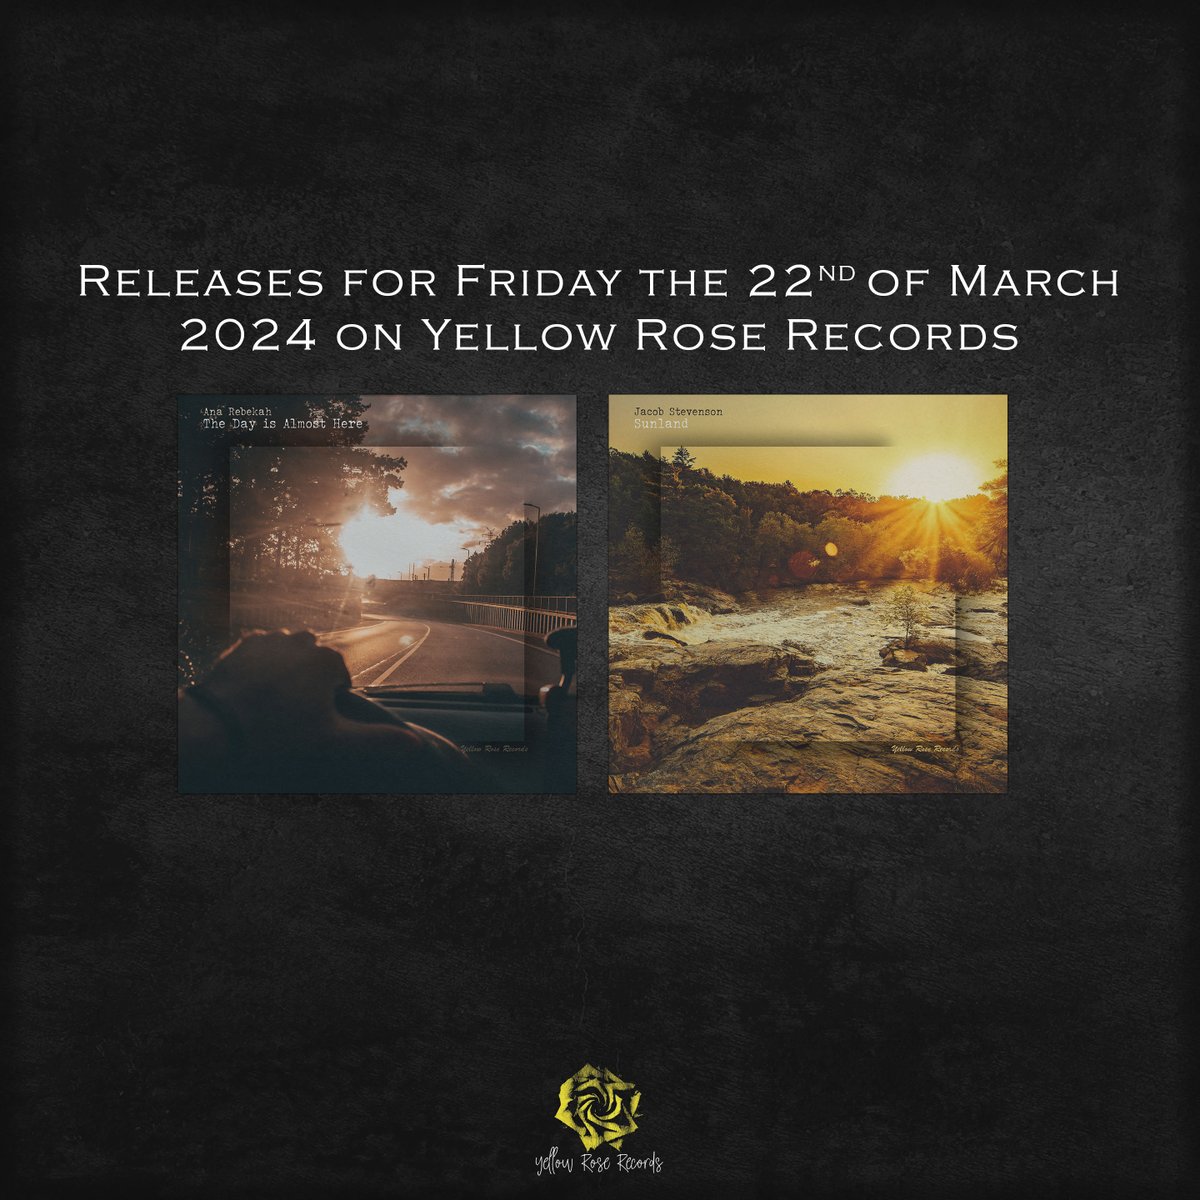 We are proud to present another amazing batch of releases coming out tomorrow! Ana Rebekah - The Day is Almost Here Jacob Stevenson - Sunland #ModernClassical #Contemporary #Relaxing #Peaceful #Calm